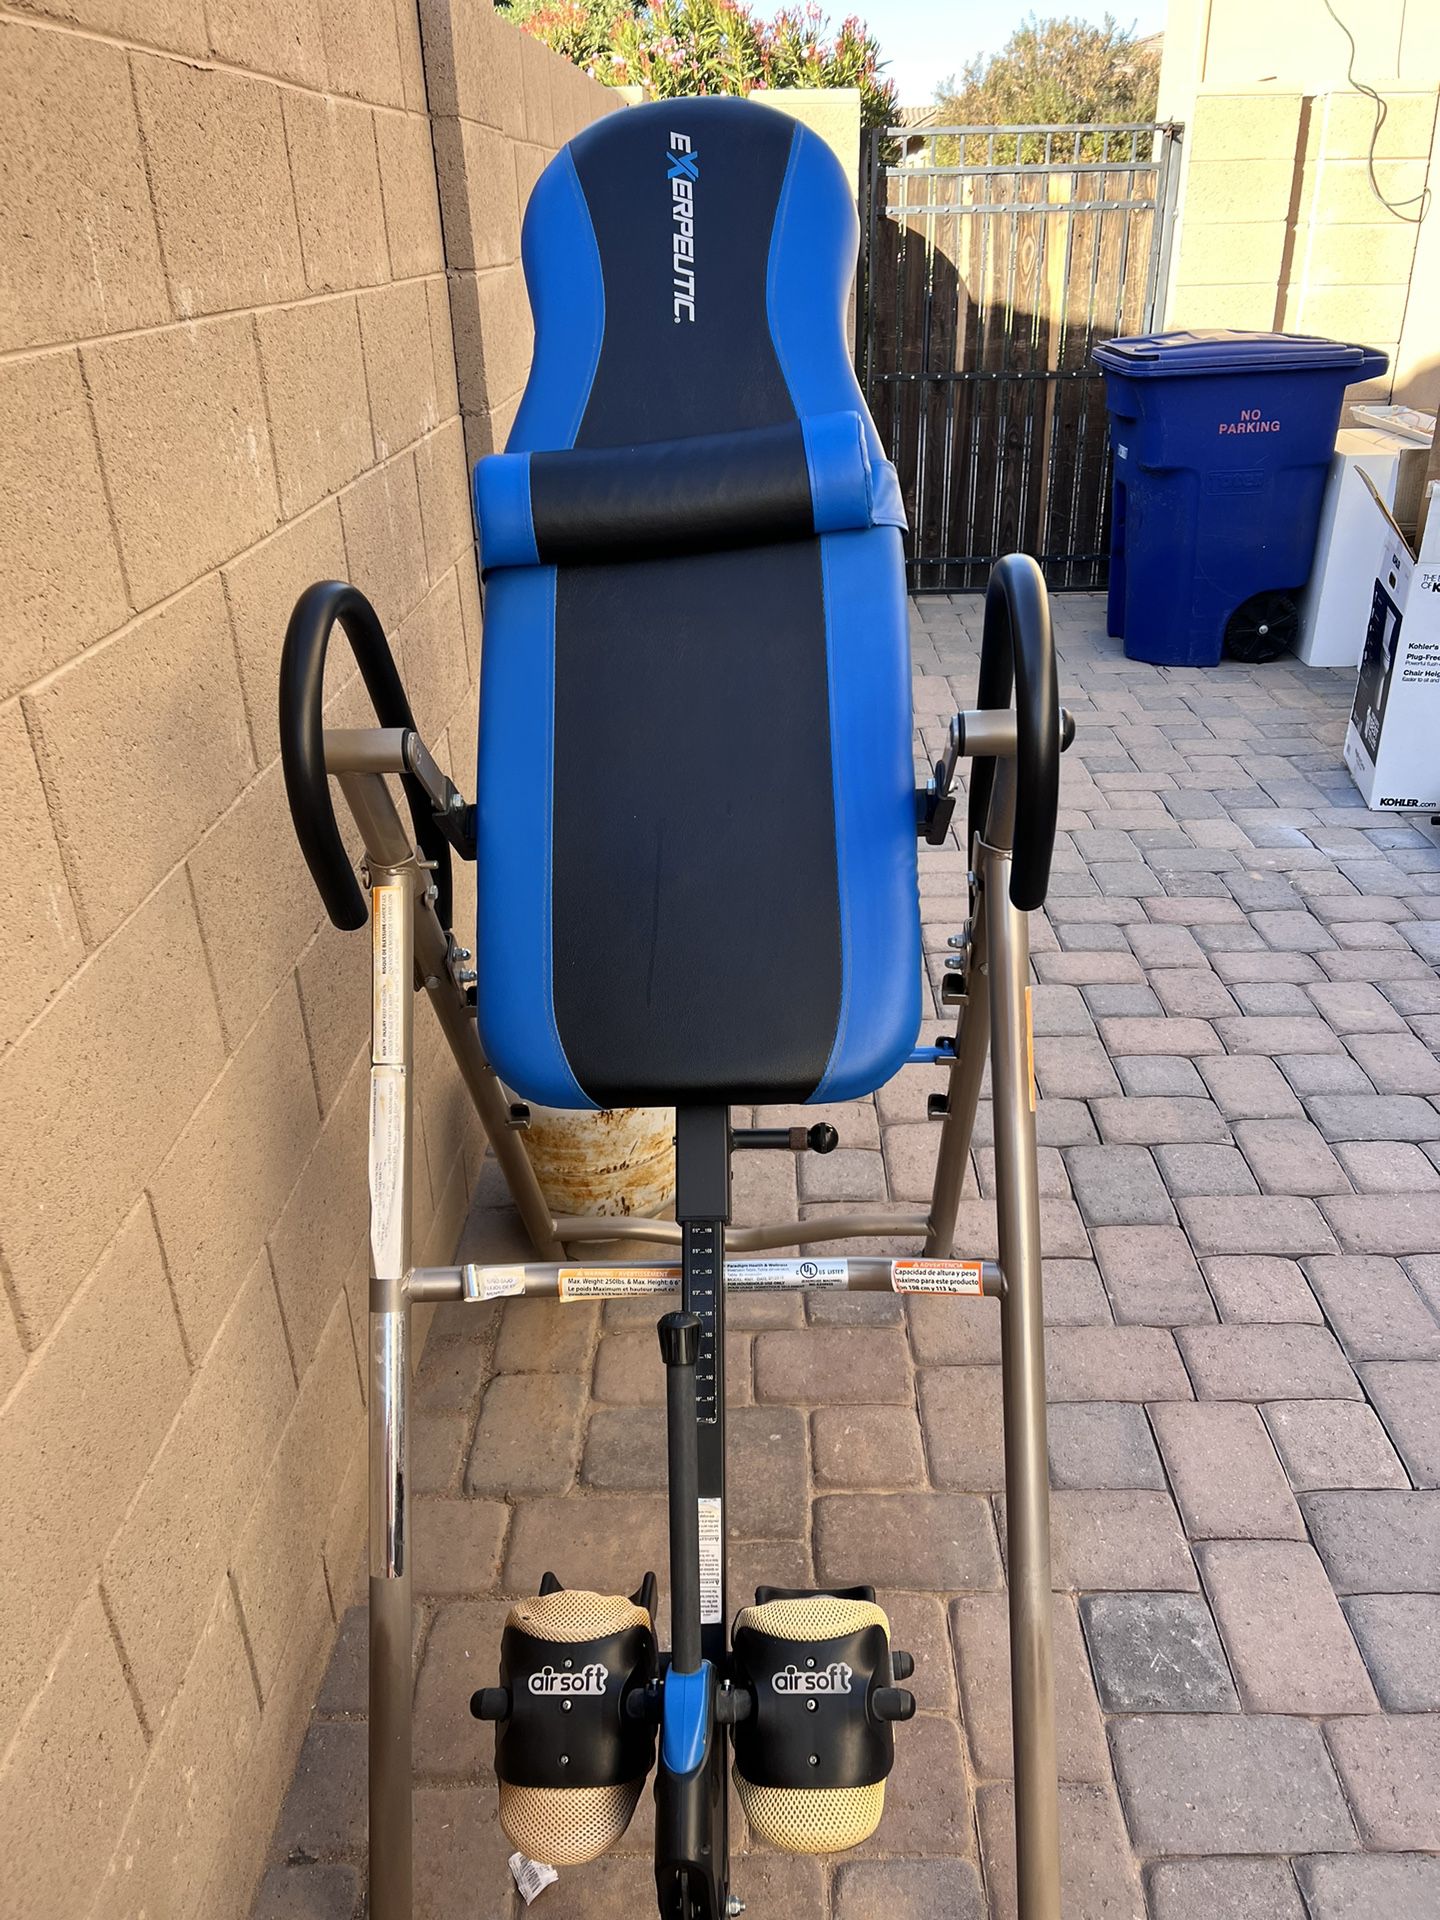 Exerpeutic Inversion Table